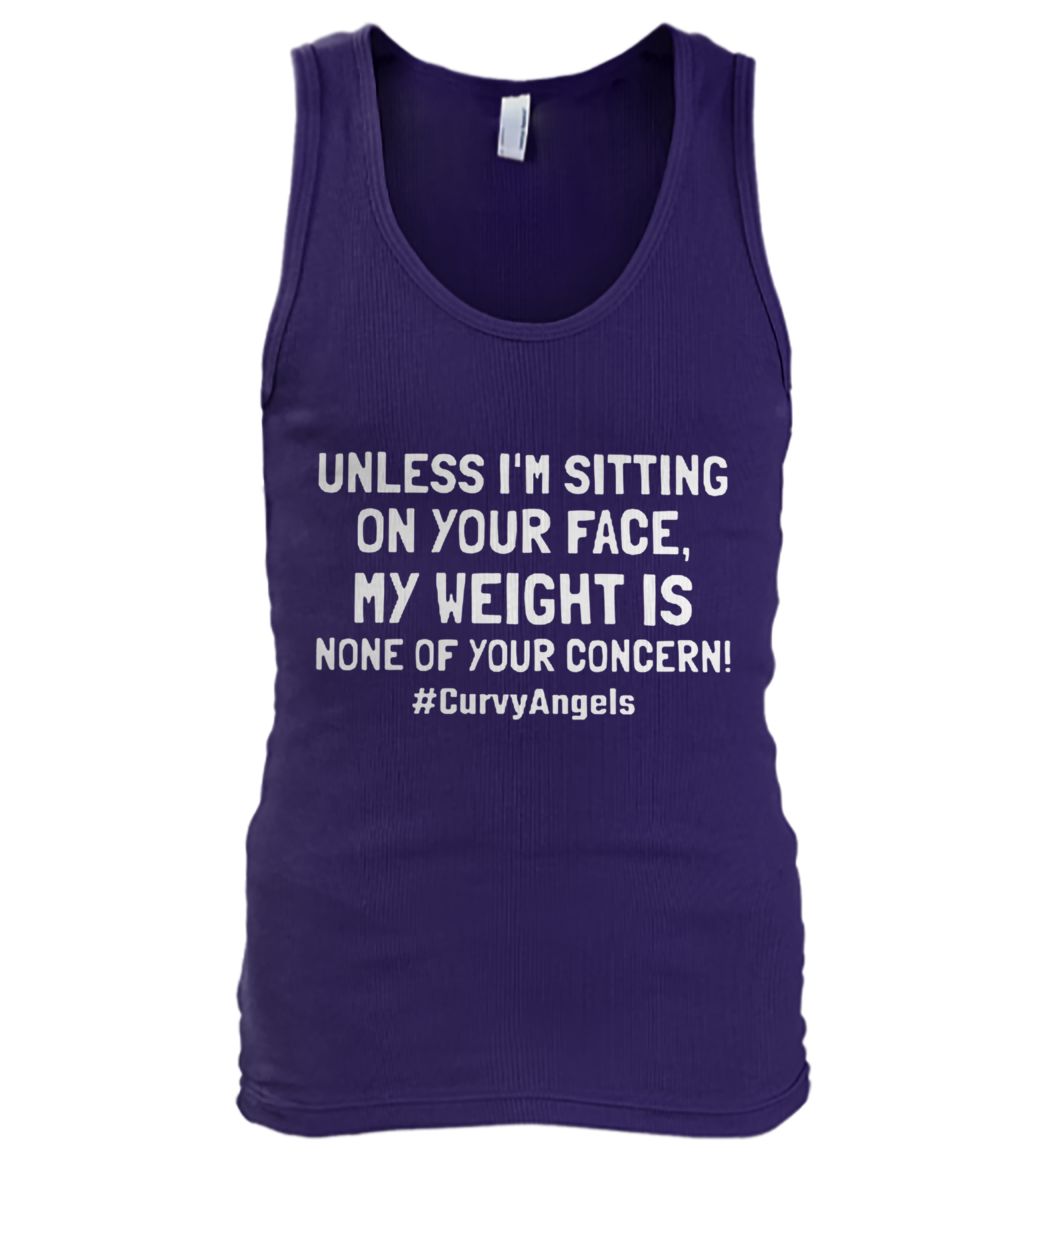 Unless I'm sitting on your face my weight is none of your concern men's tank top